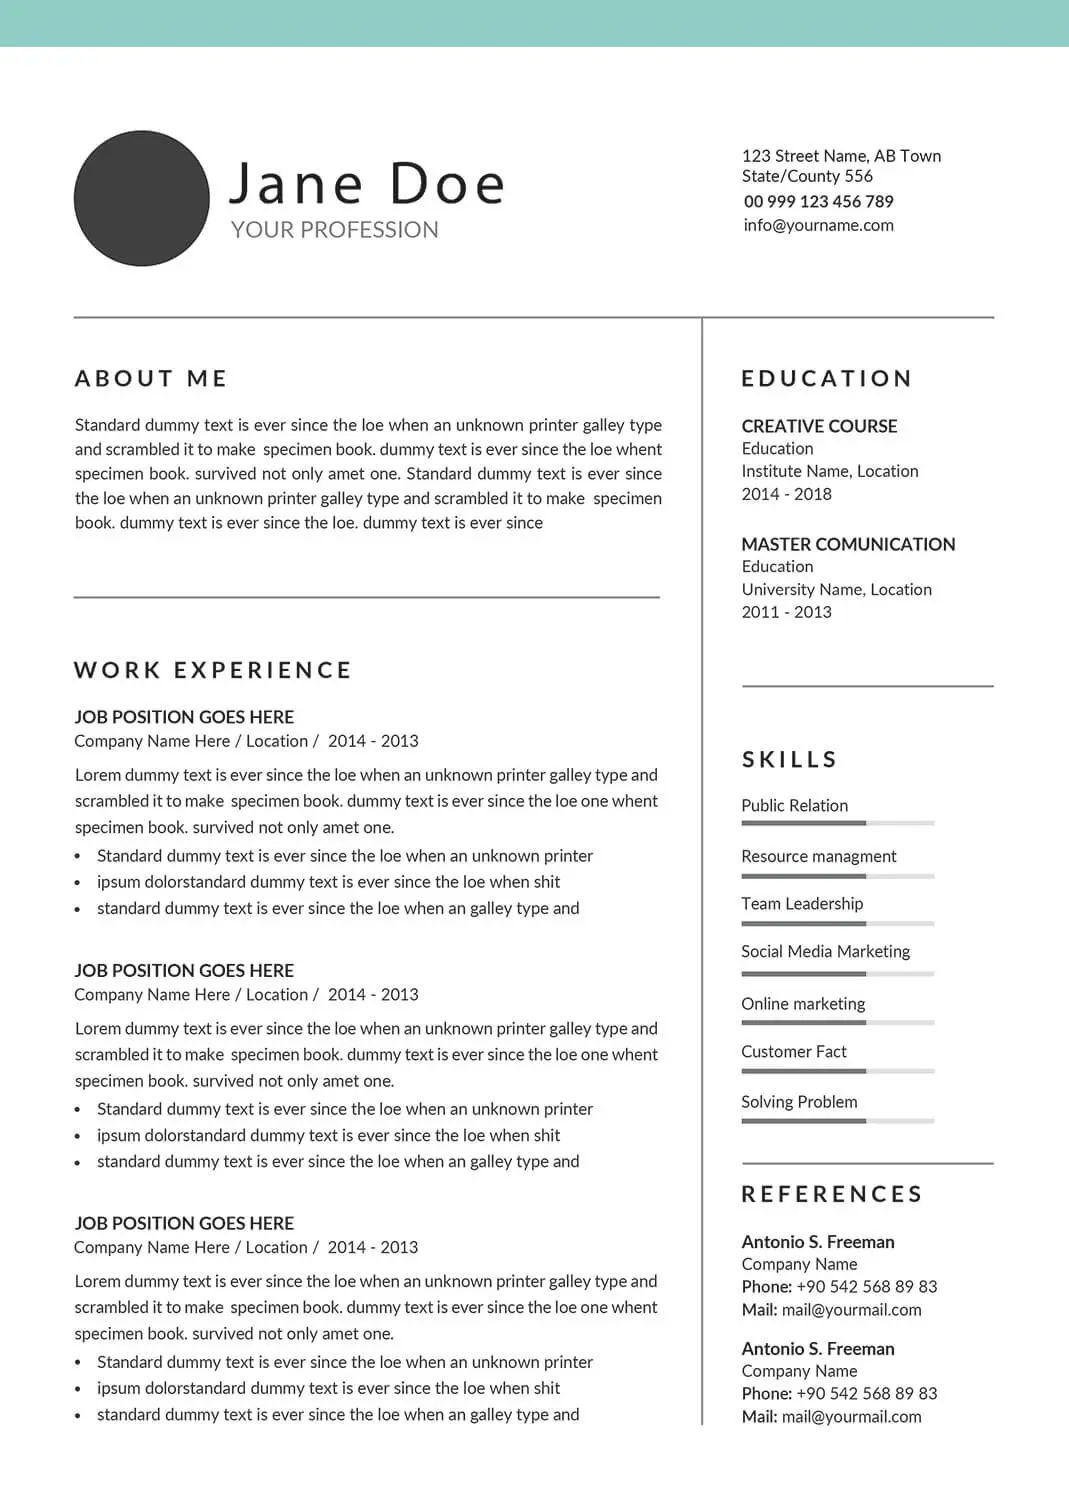 Best resume format for
quality assurance professionals